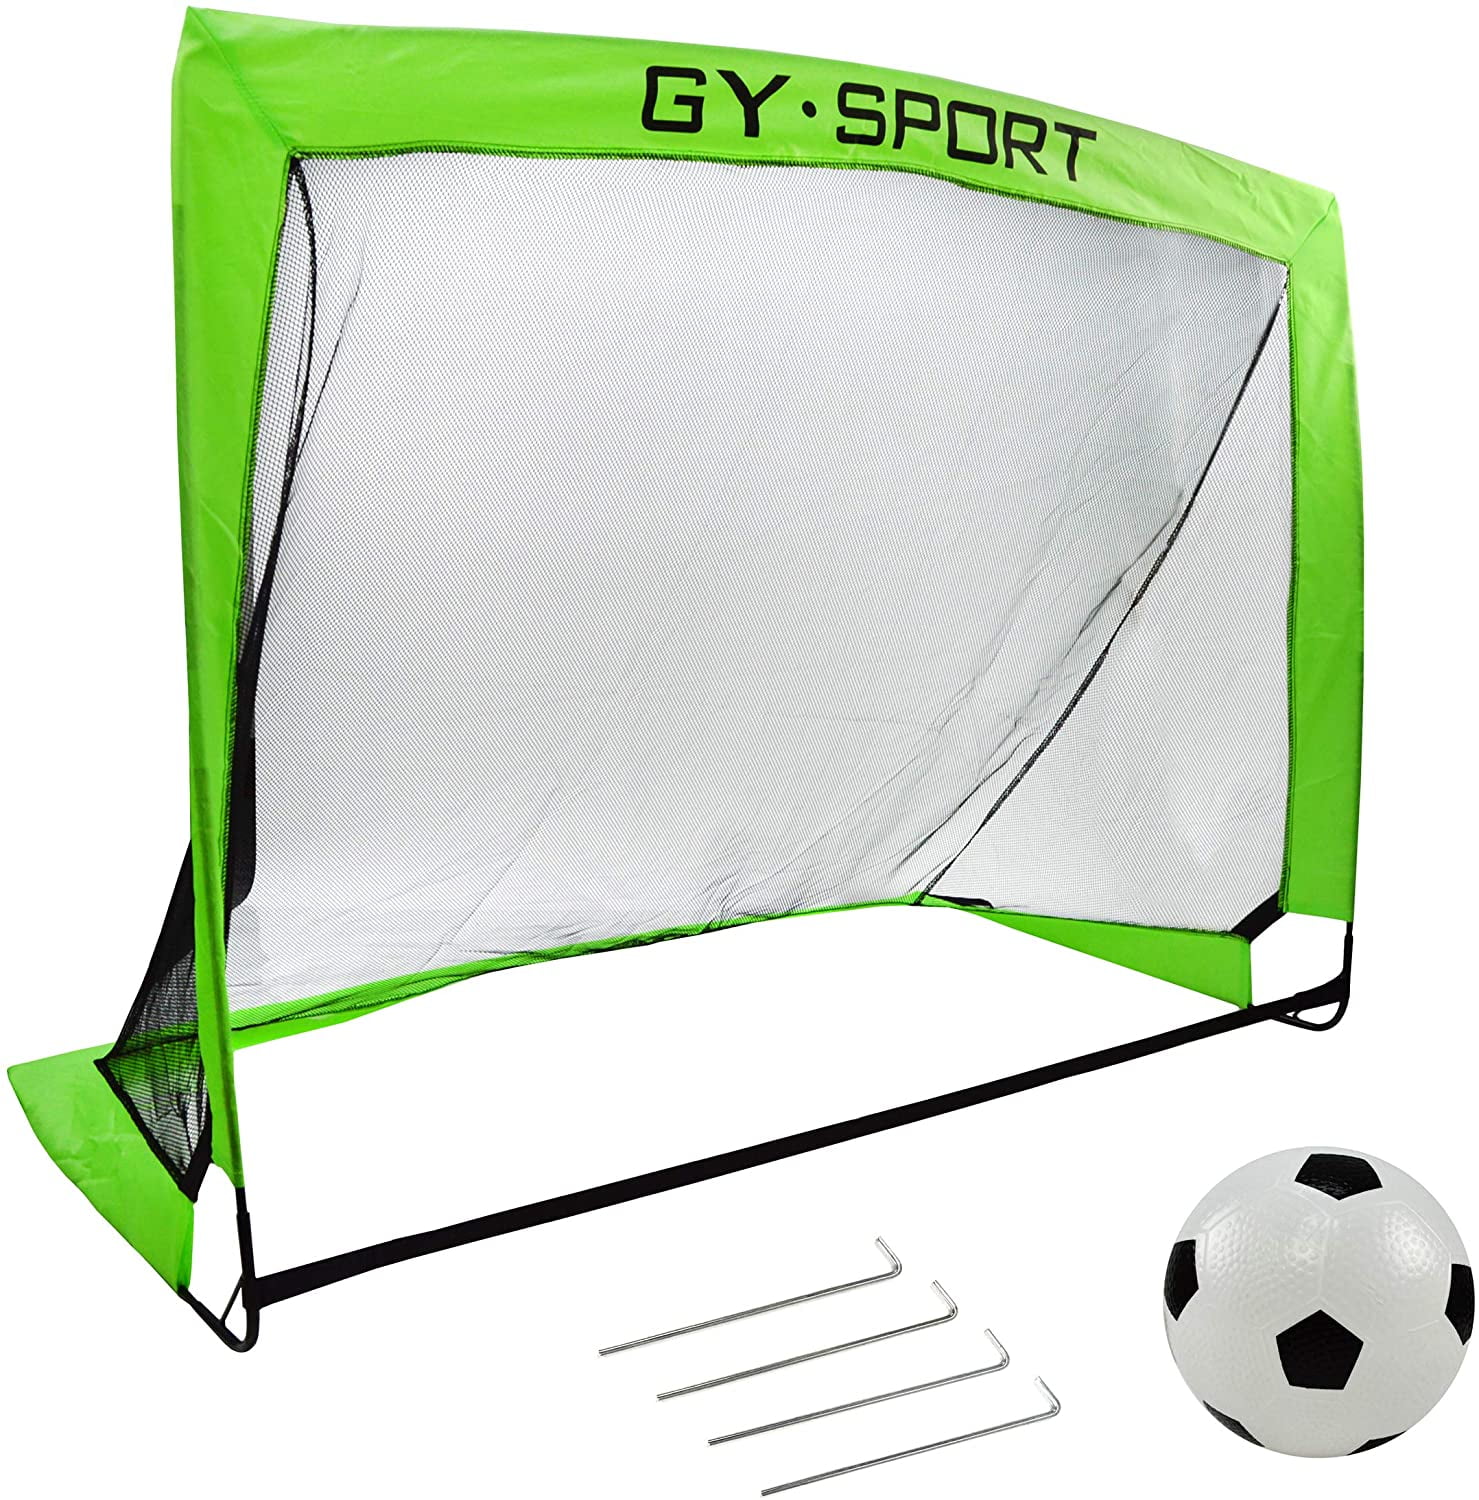 Details about   Kids Portable Folding Football Outdoor Soccer Goal Training Hot Net Carry T1Q2 